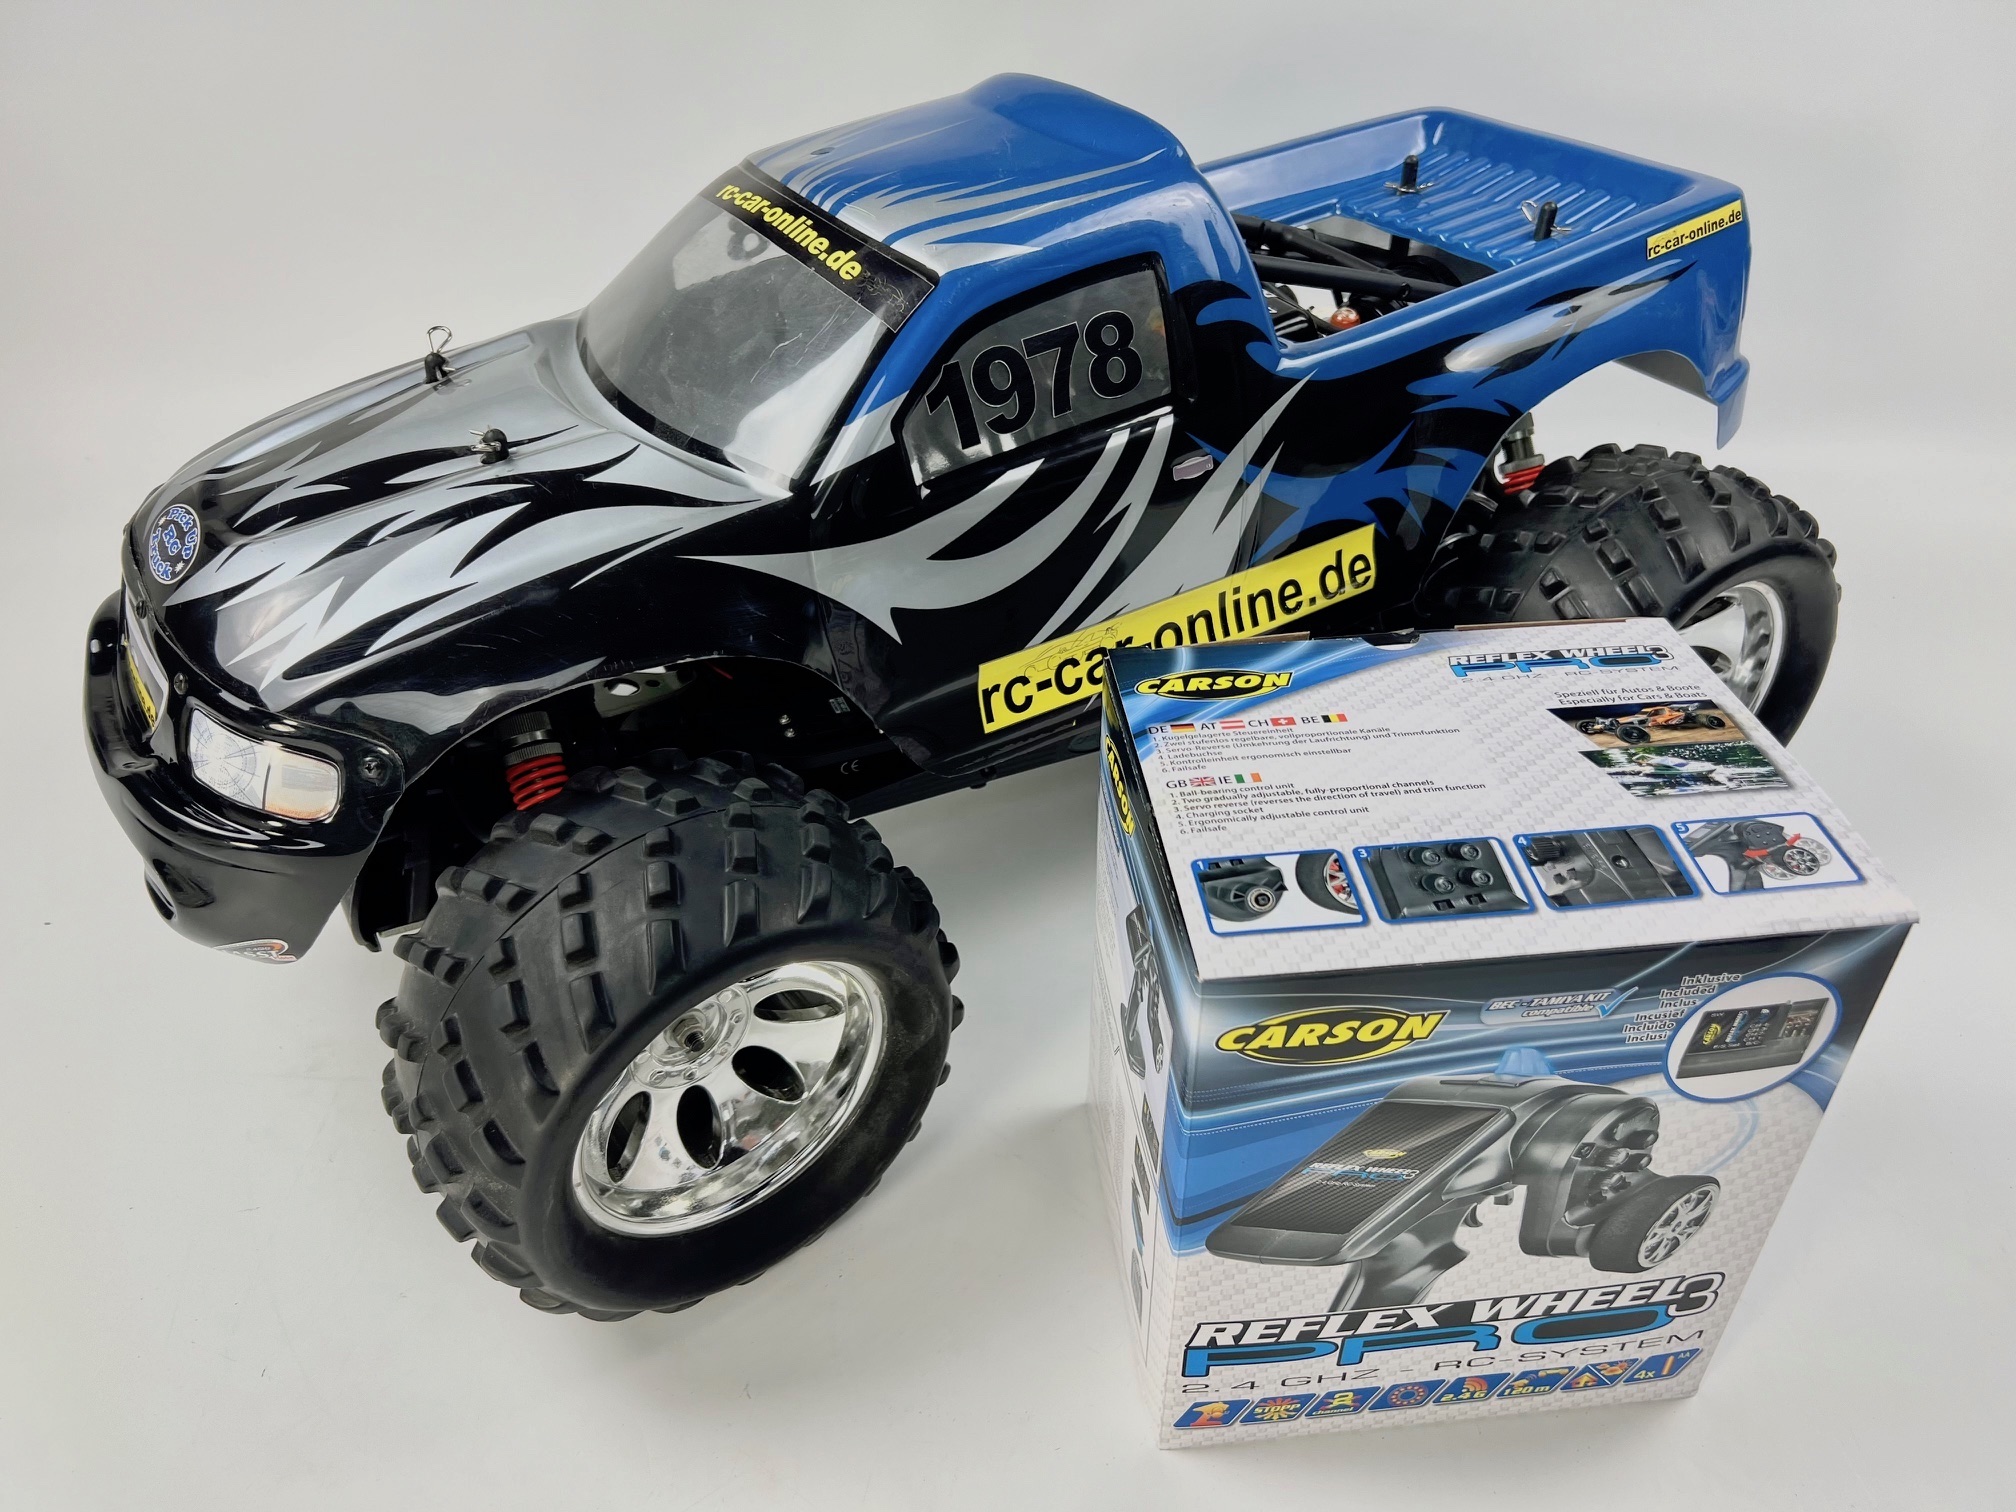 Smartech Carson Monster Truck RTR "as good as new", used.